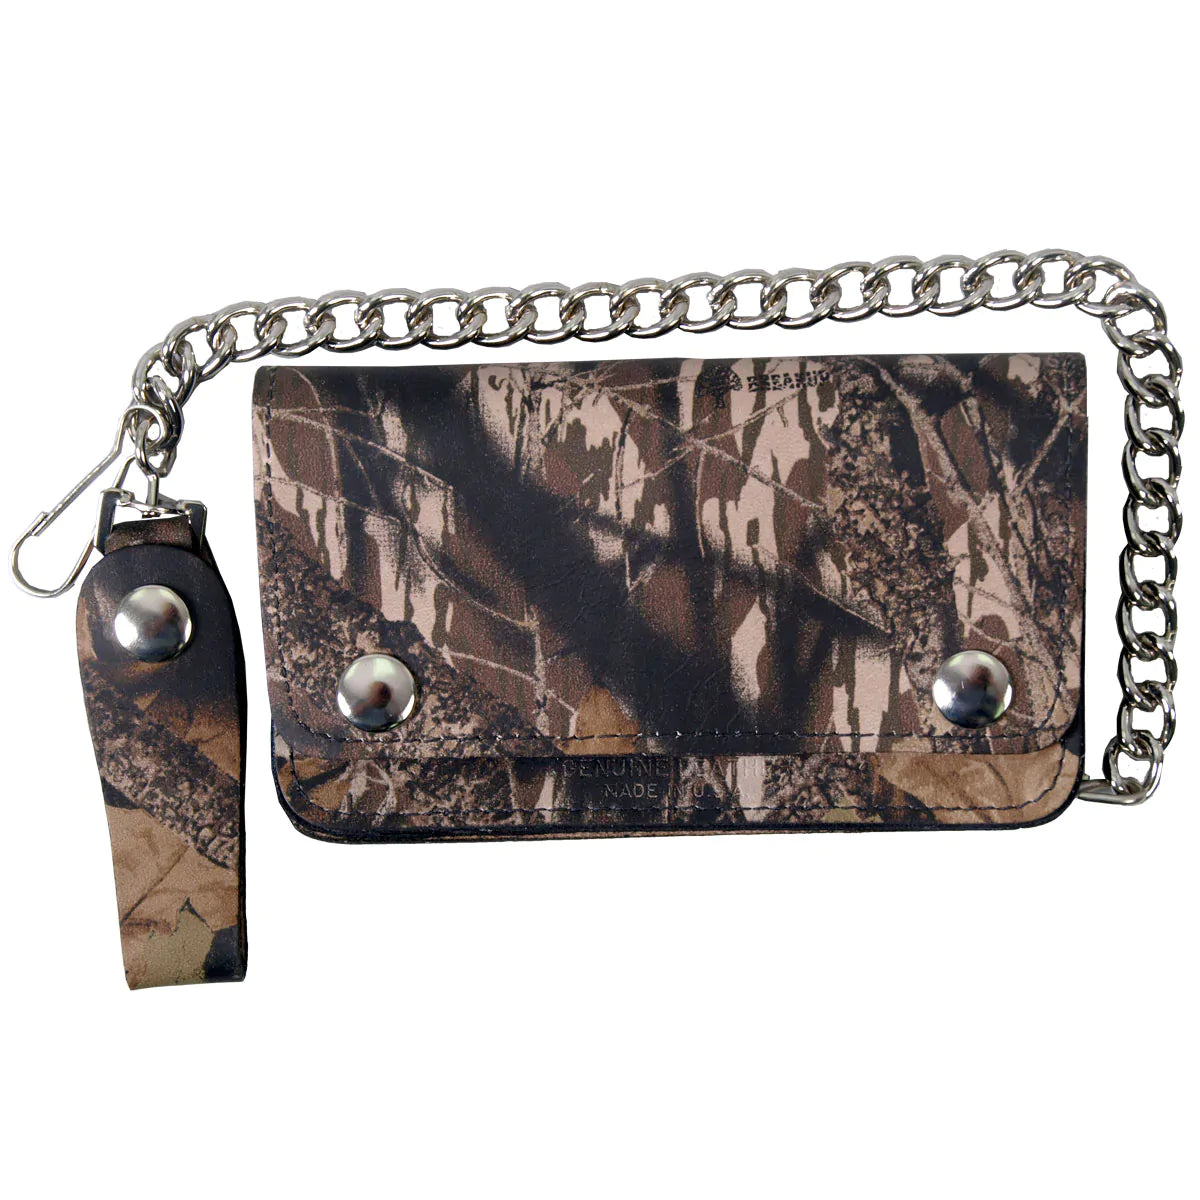 Hunting Camo 6" Bi-fold WLC3002 Leather Bi-Fold Wallet with Chain | Hot Leathers